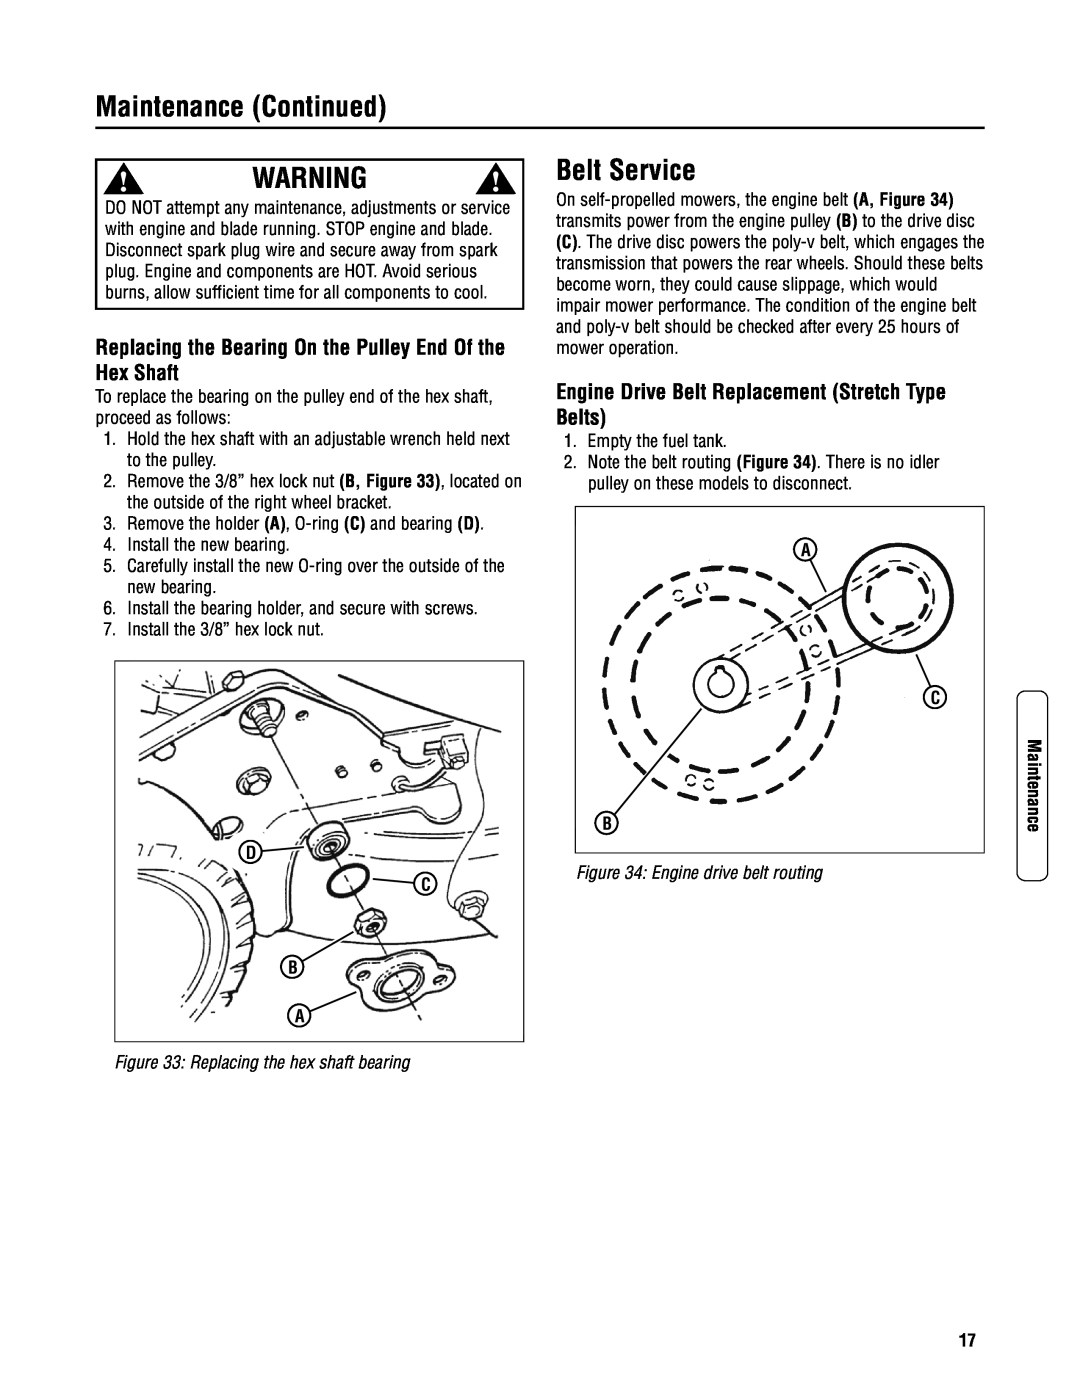 Snapper NP2167519B Belt Service, Replacing the Bearing On the Pulley End Of the Hex Shaft, Engine drive belt routing 